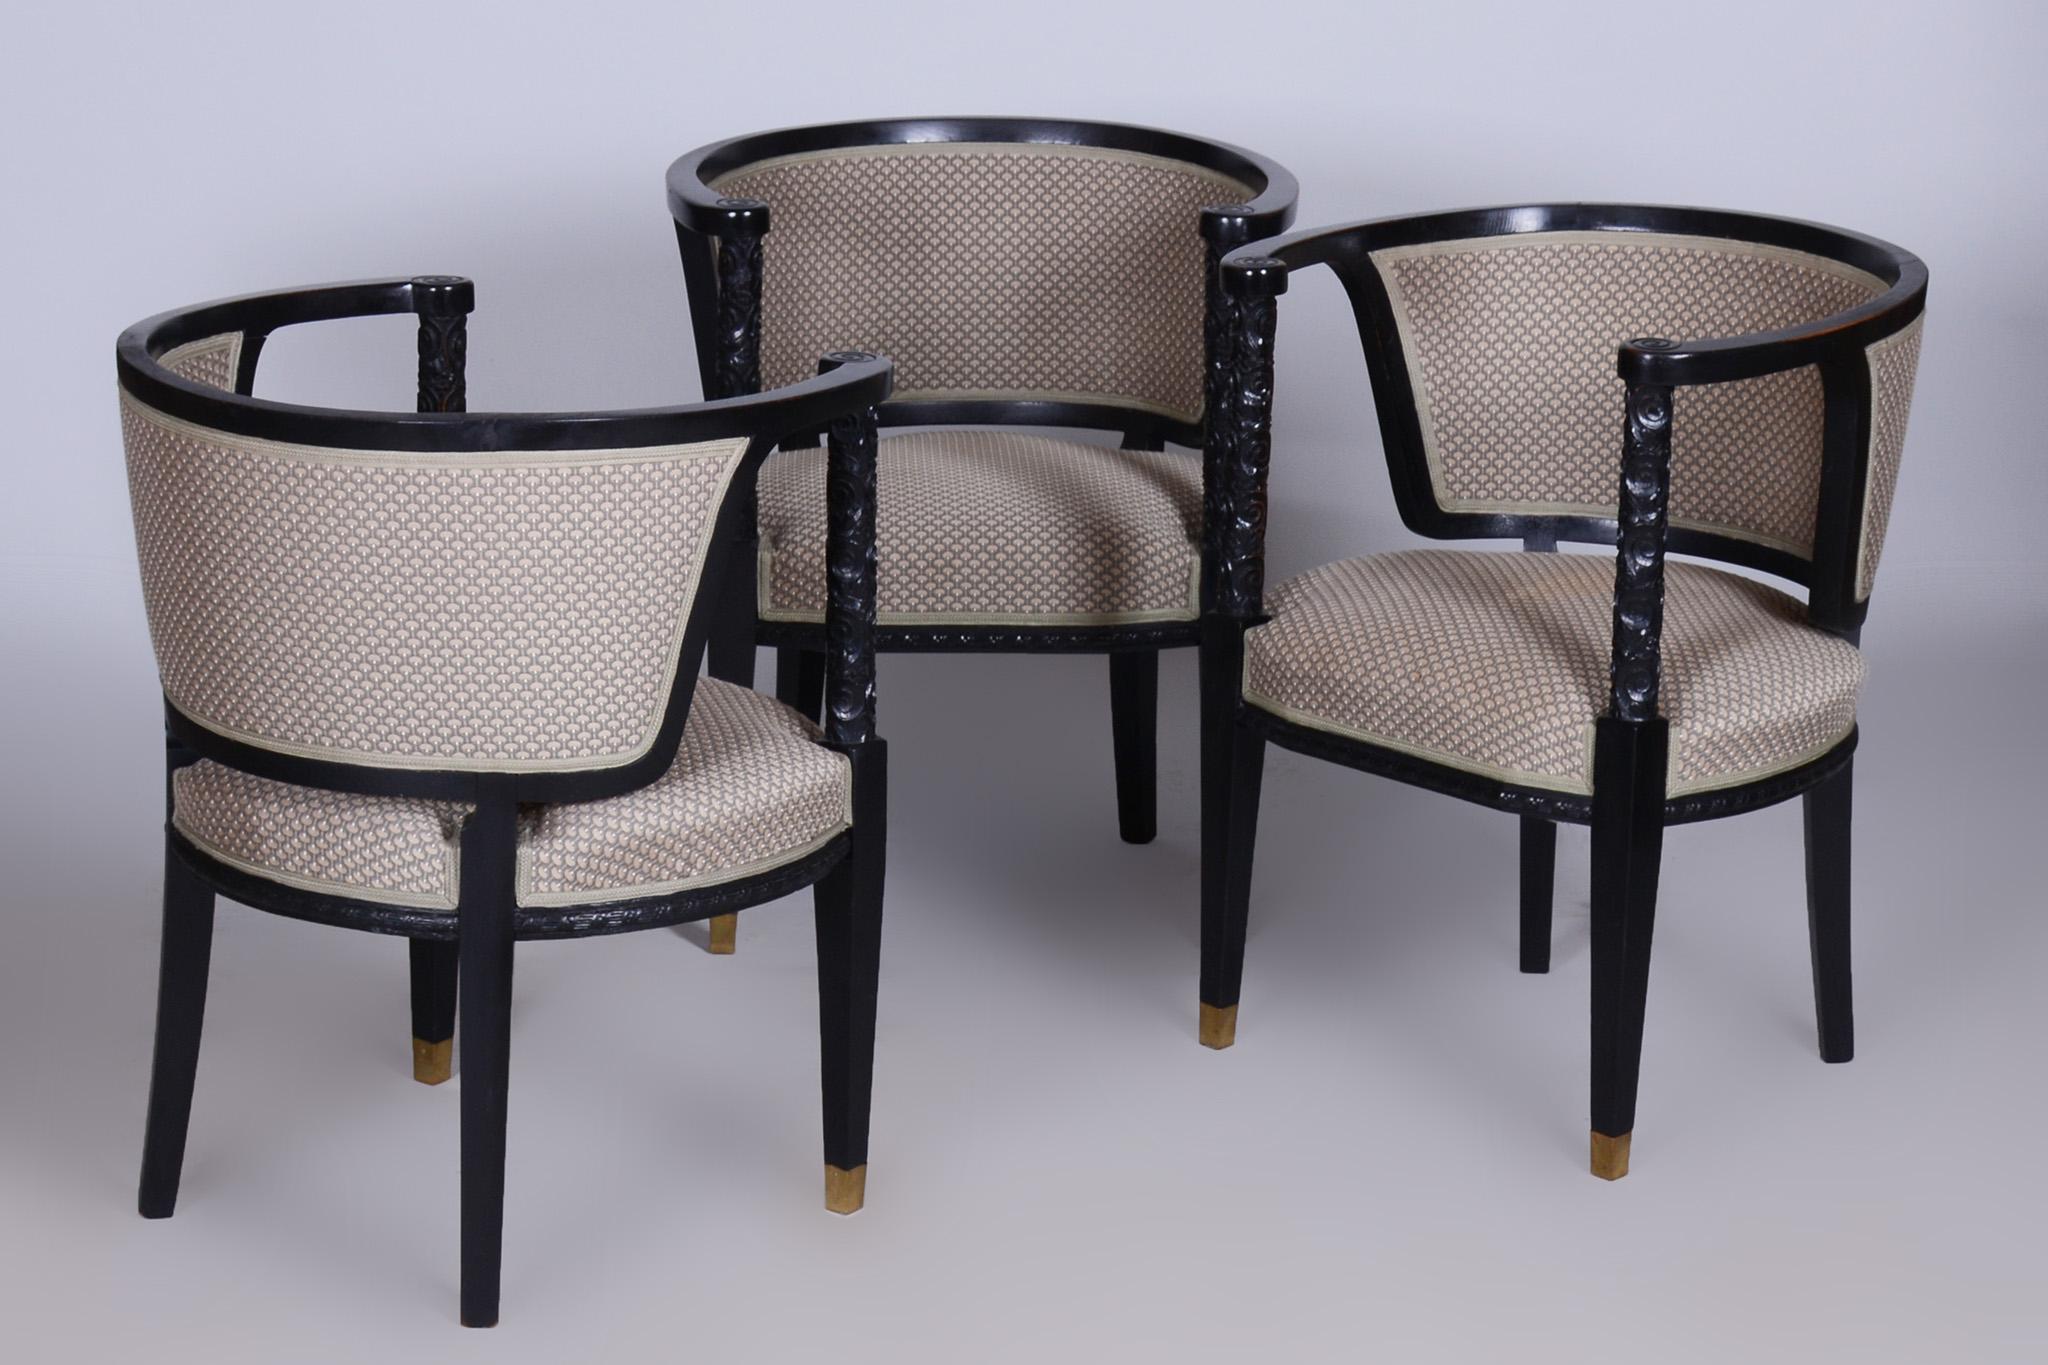 Restored Art Nouveau Seating Set, Stained Oak, New Upholstery, Austria, 1910s For Sale 15